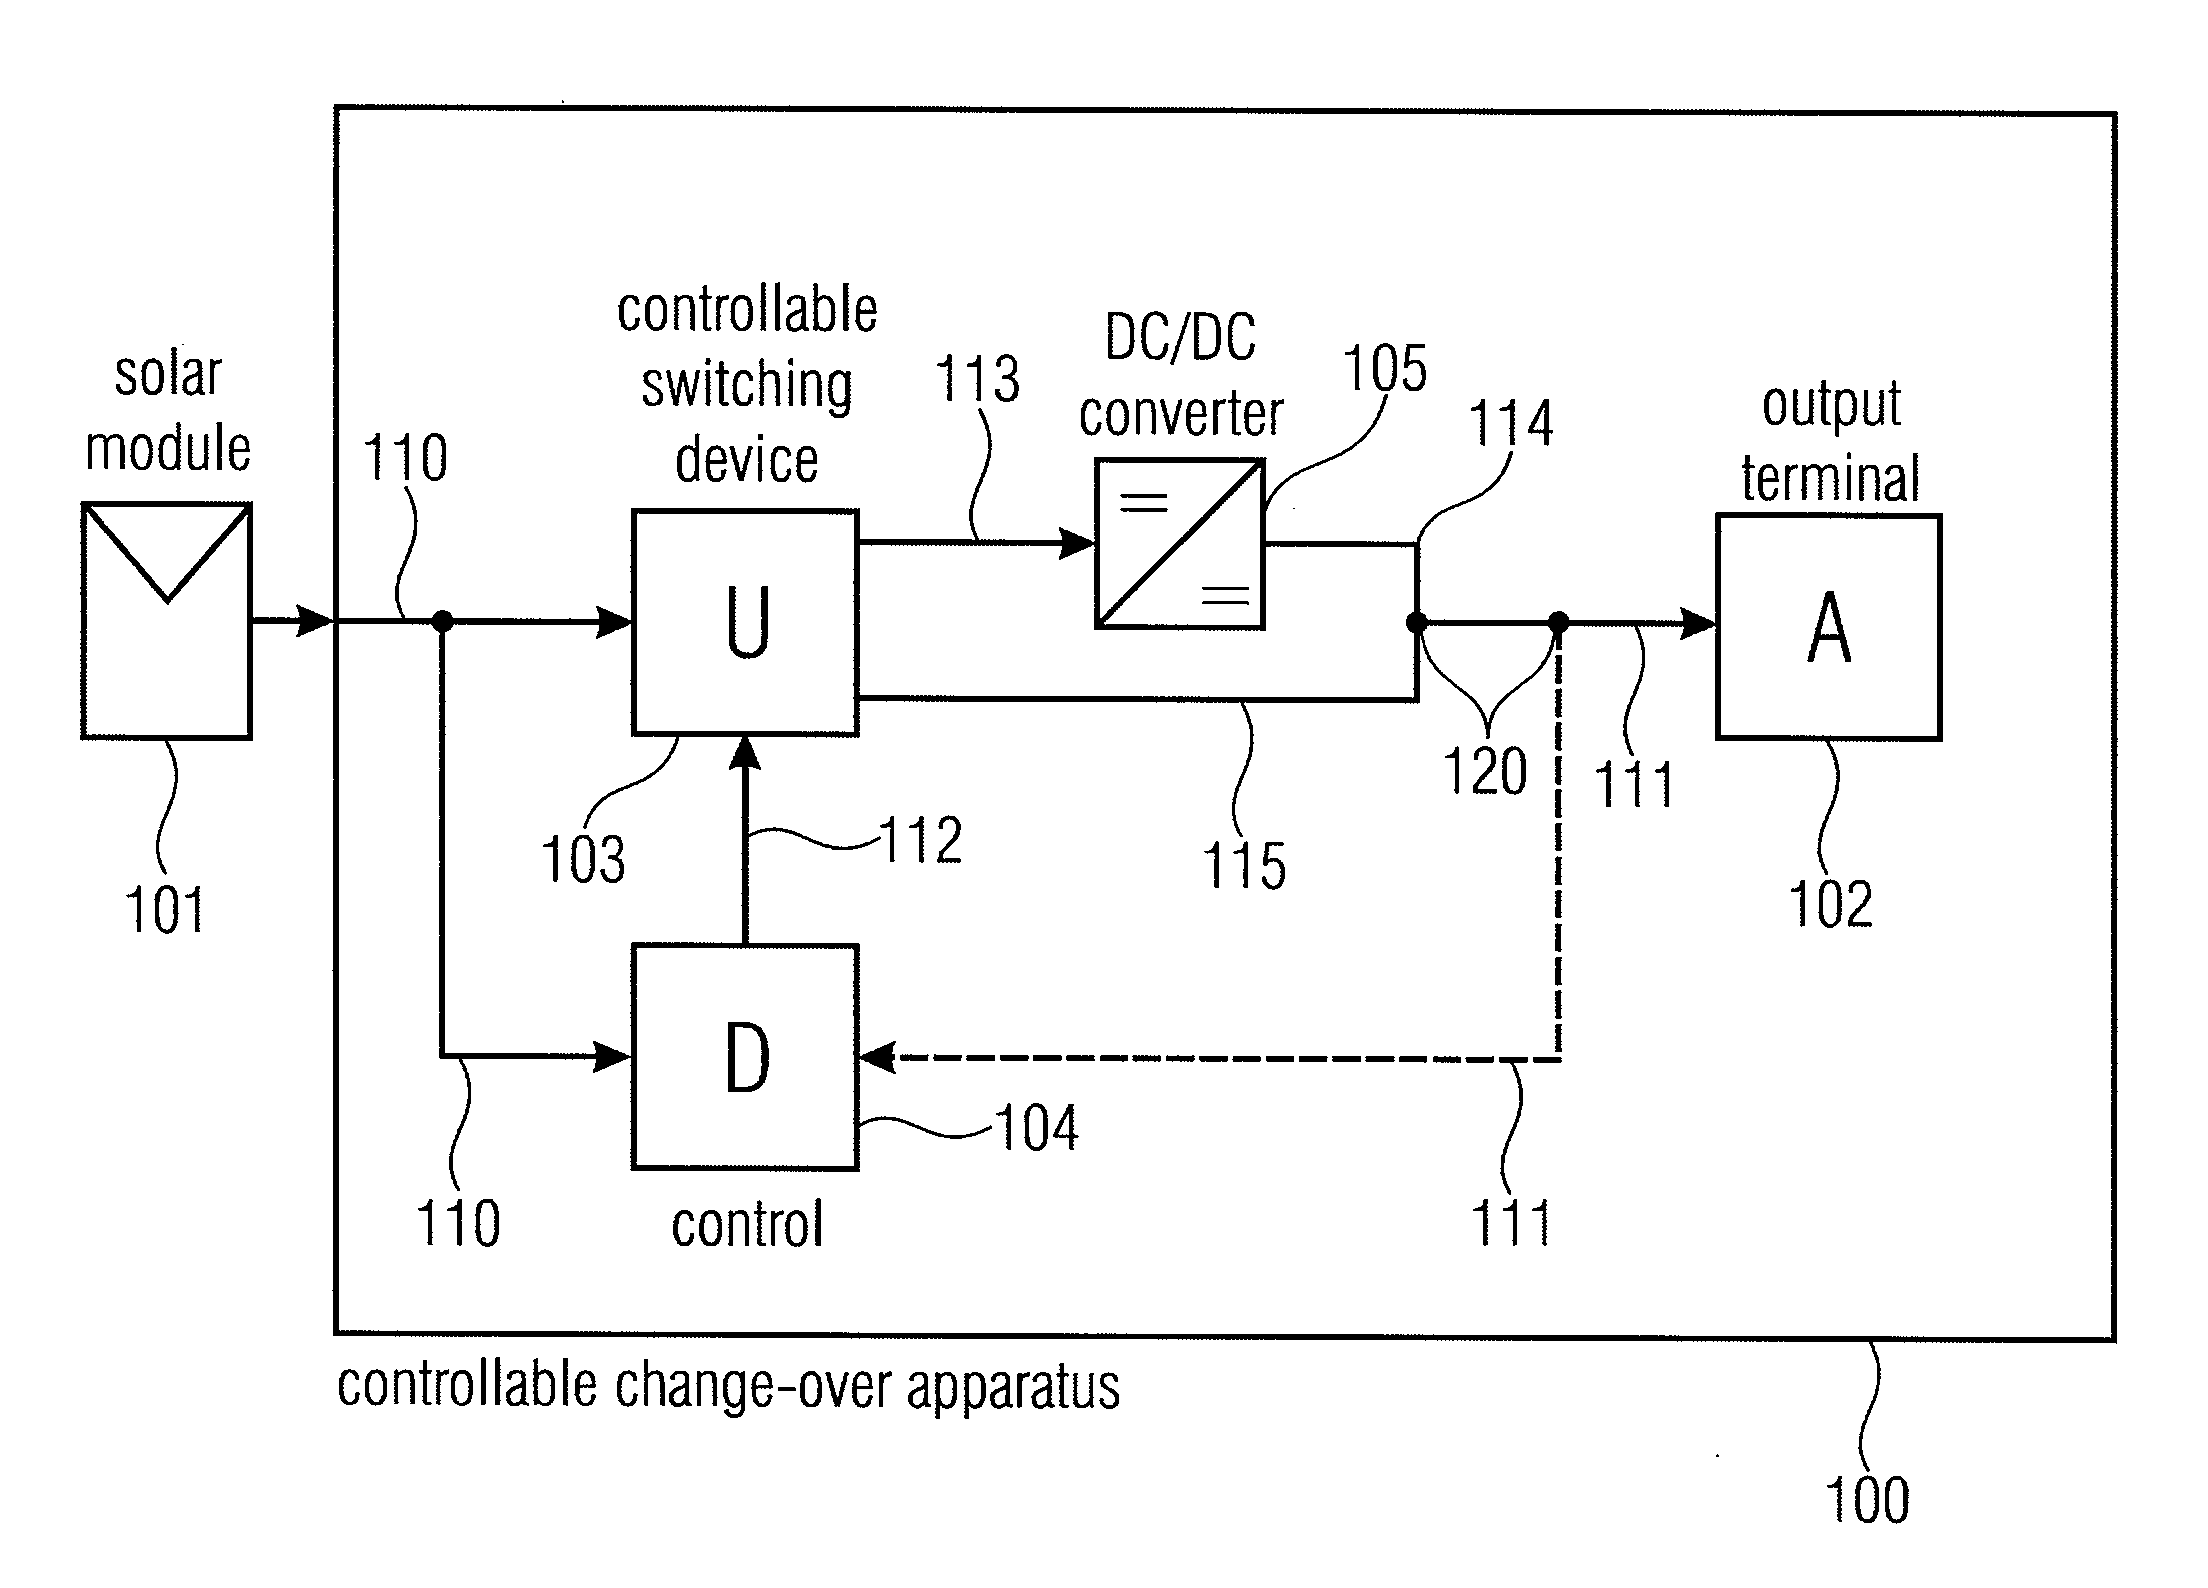 Controllable Change-Over Apparatus for a Solar Module